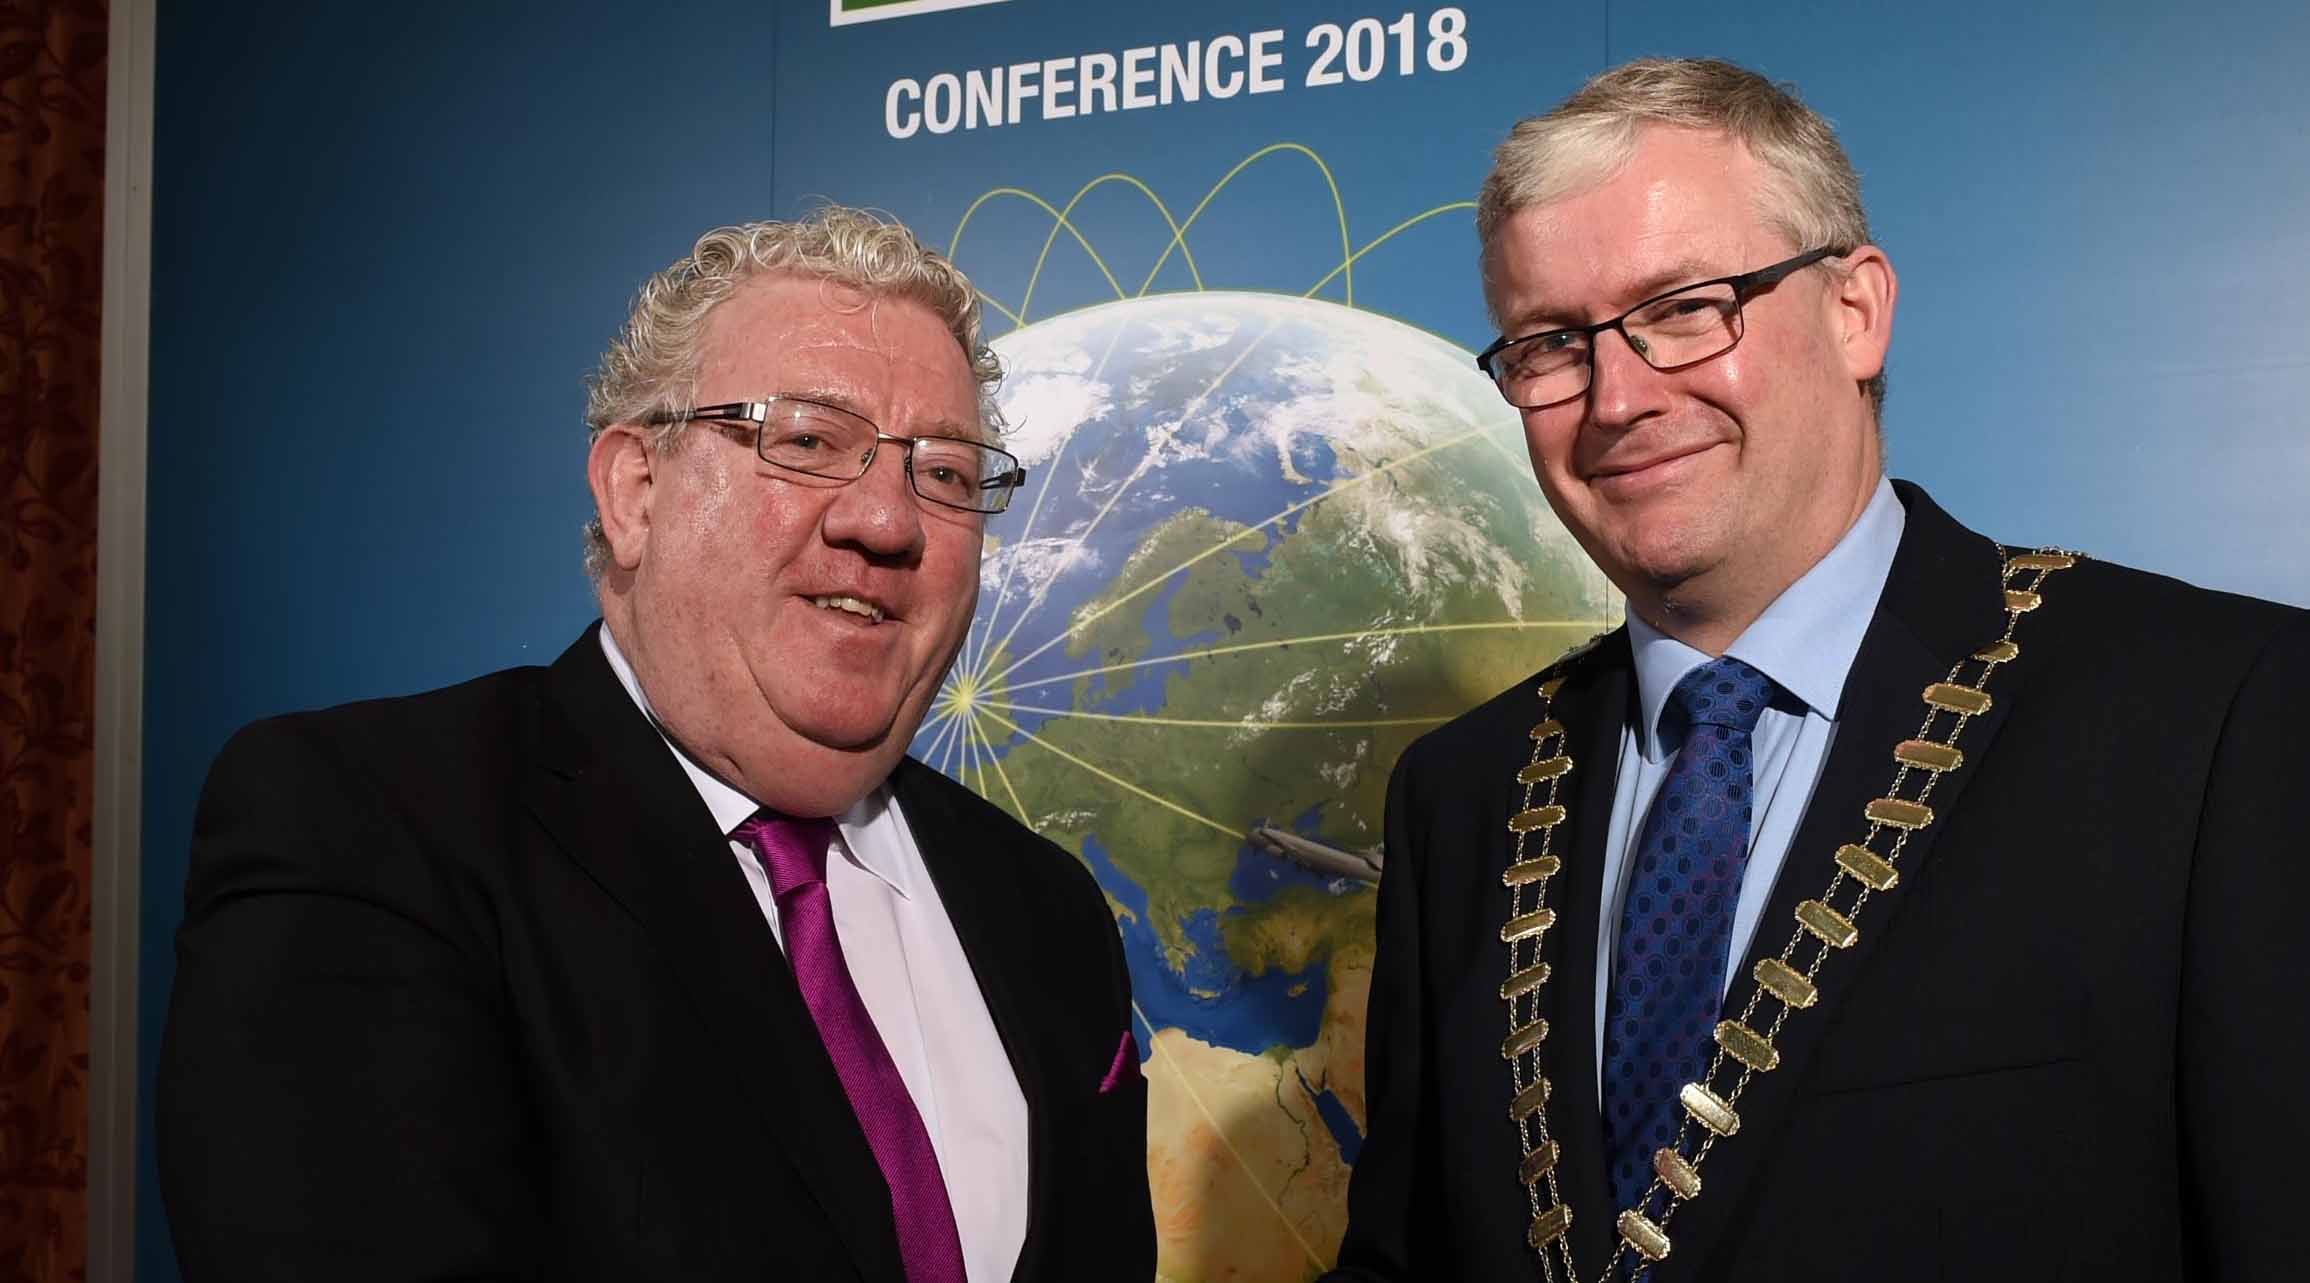 From left: Outgoing IHF President Joe Dolan hands over the Chain of Office to the incoming President Michael Lennon at this year's IHF Conference in Cavan.